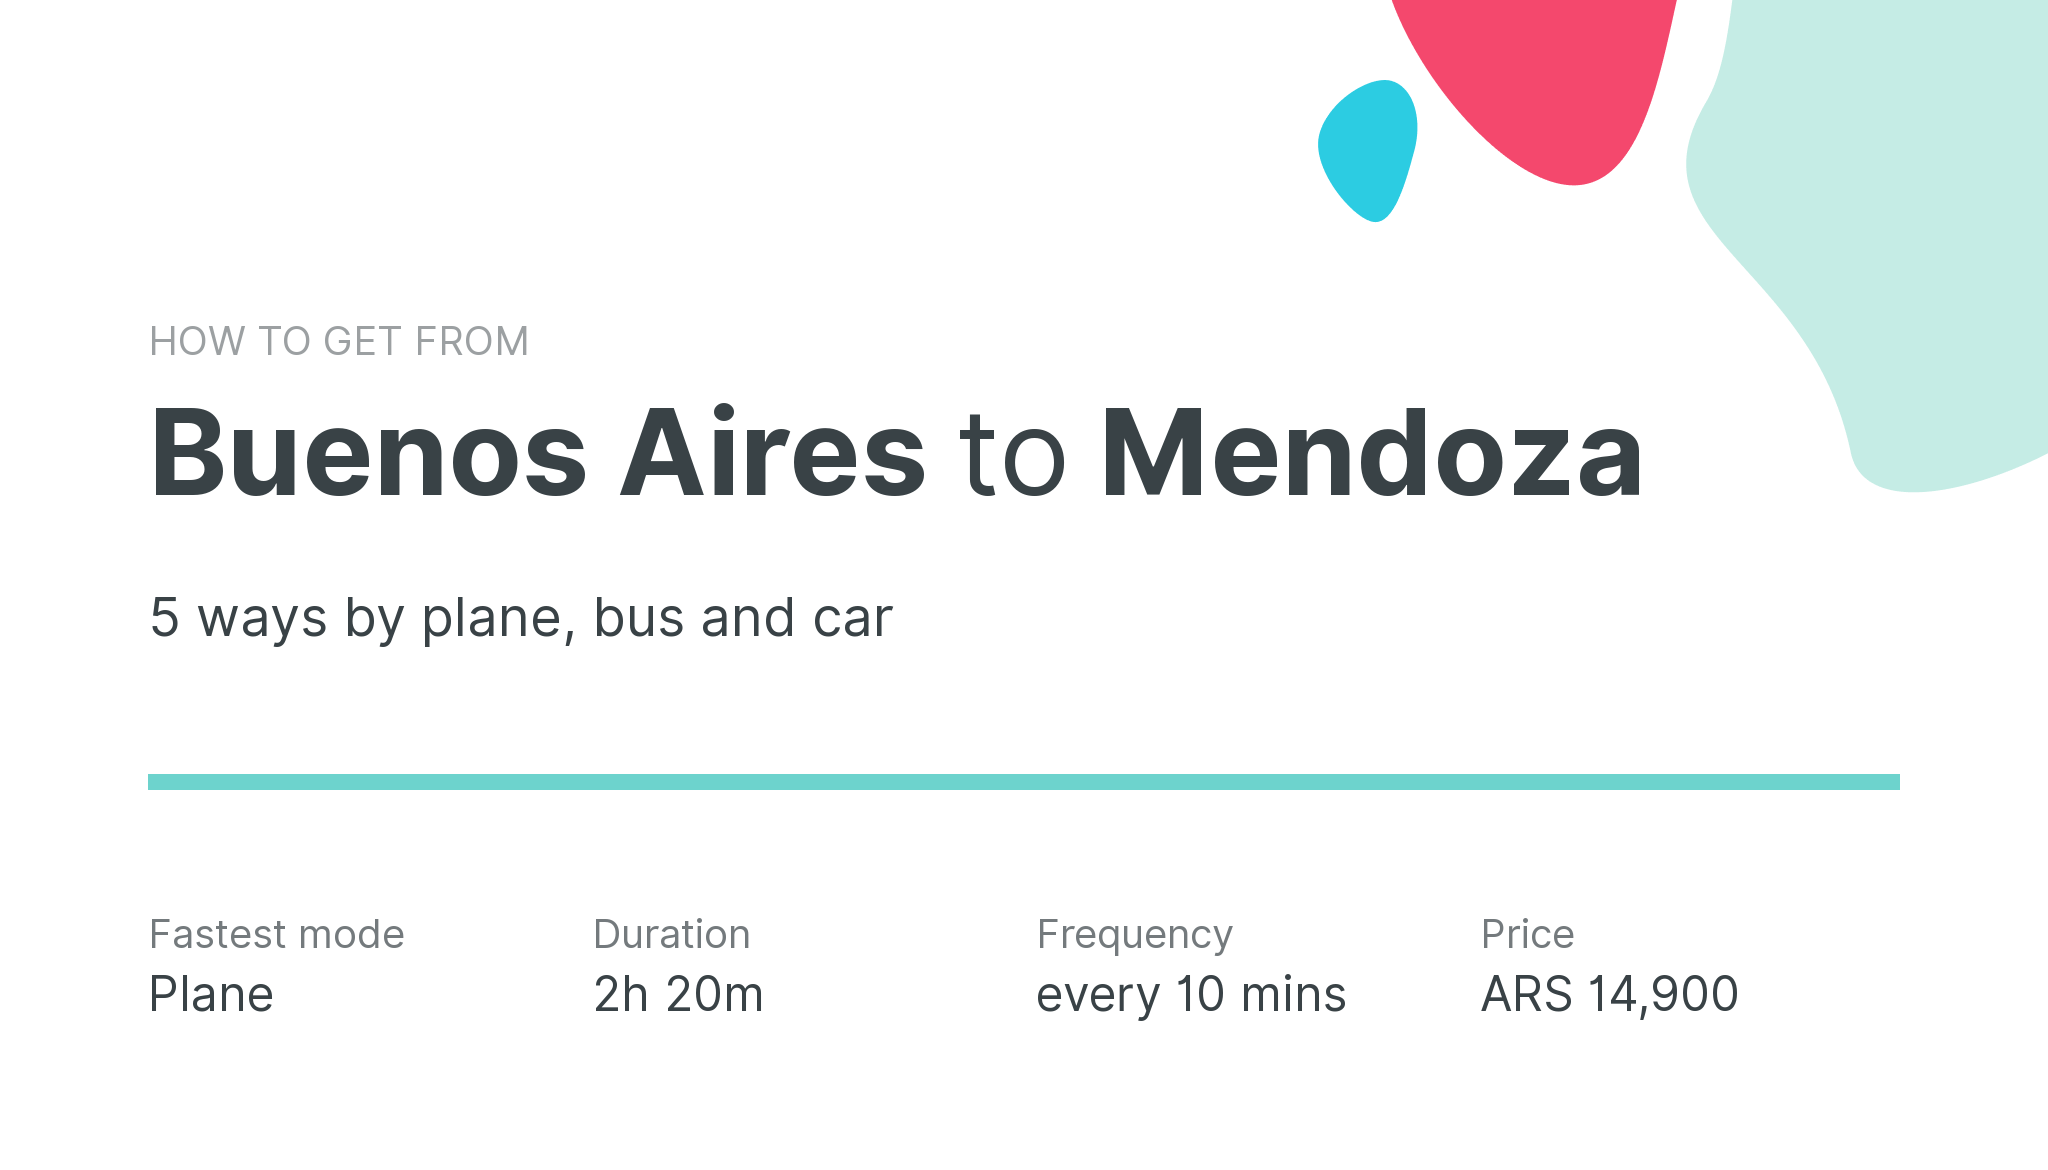 How do I get from Buenos Aires to Mendoza